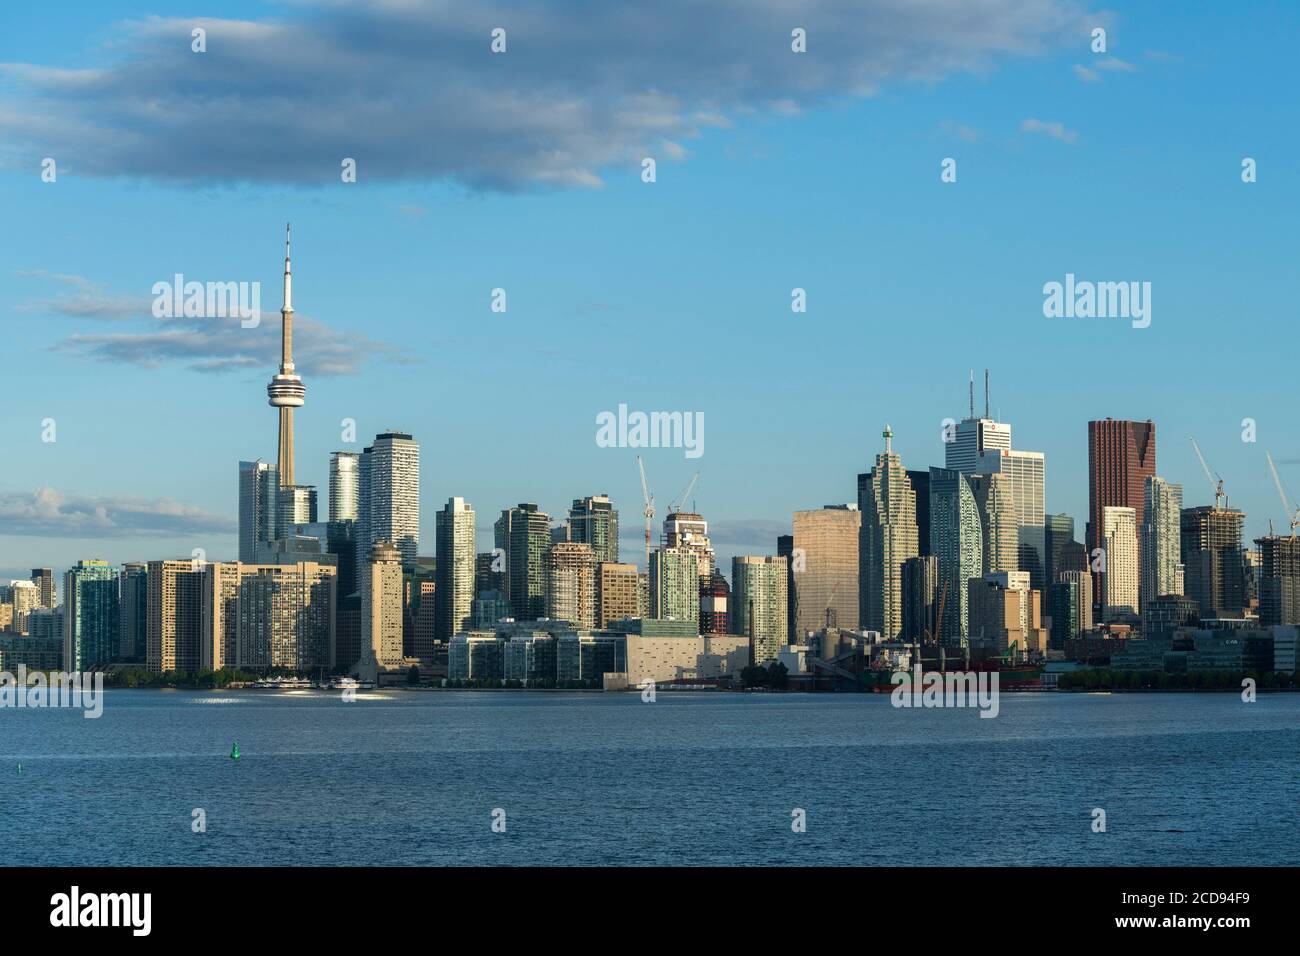 Canada, Ontario, Toronto, general view of the city and skyscrapers from the harbor Stock Photo